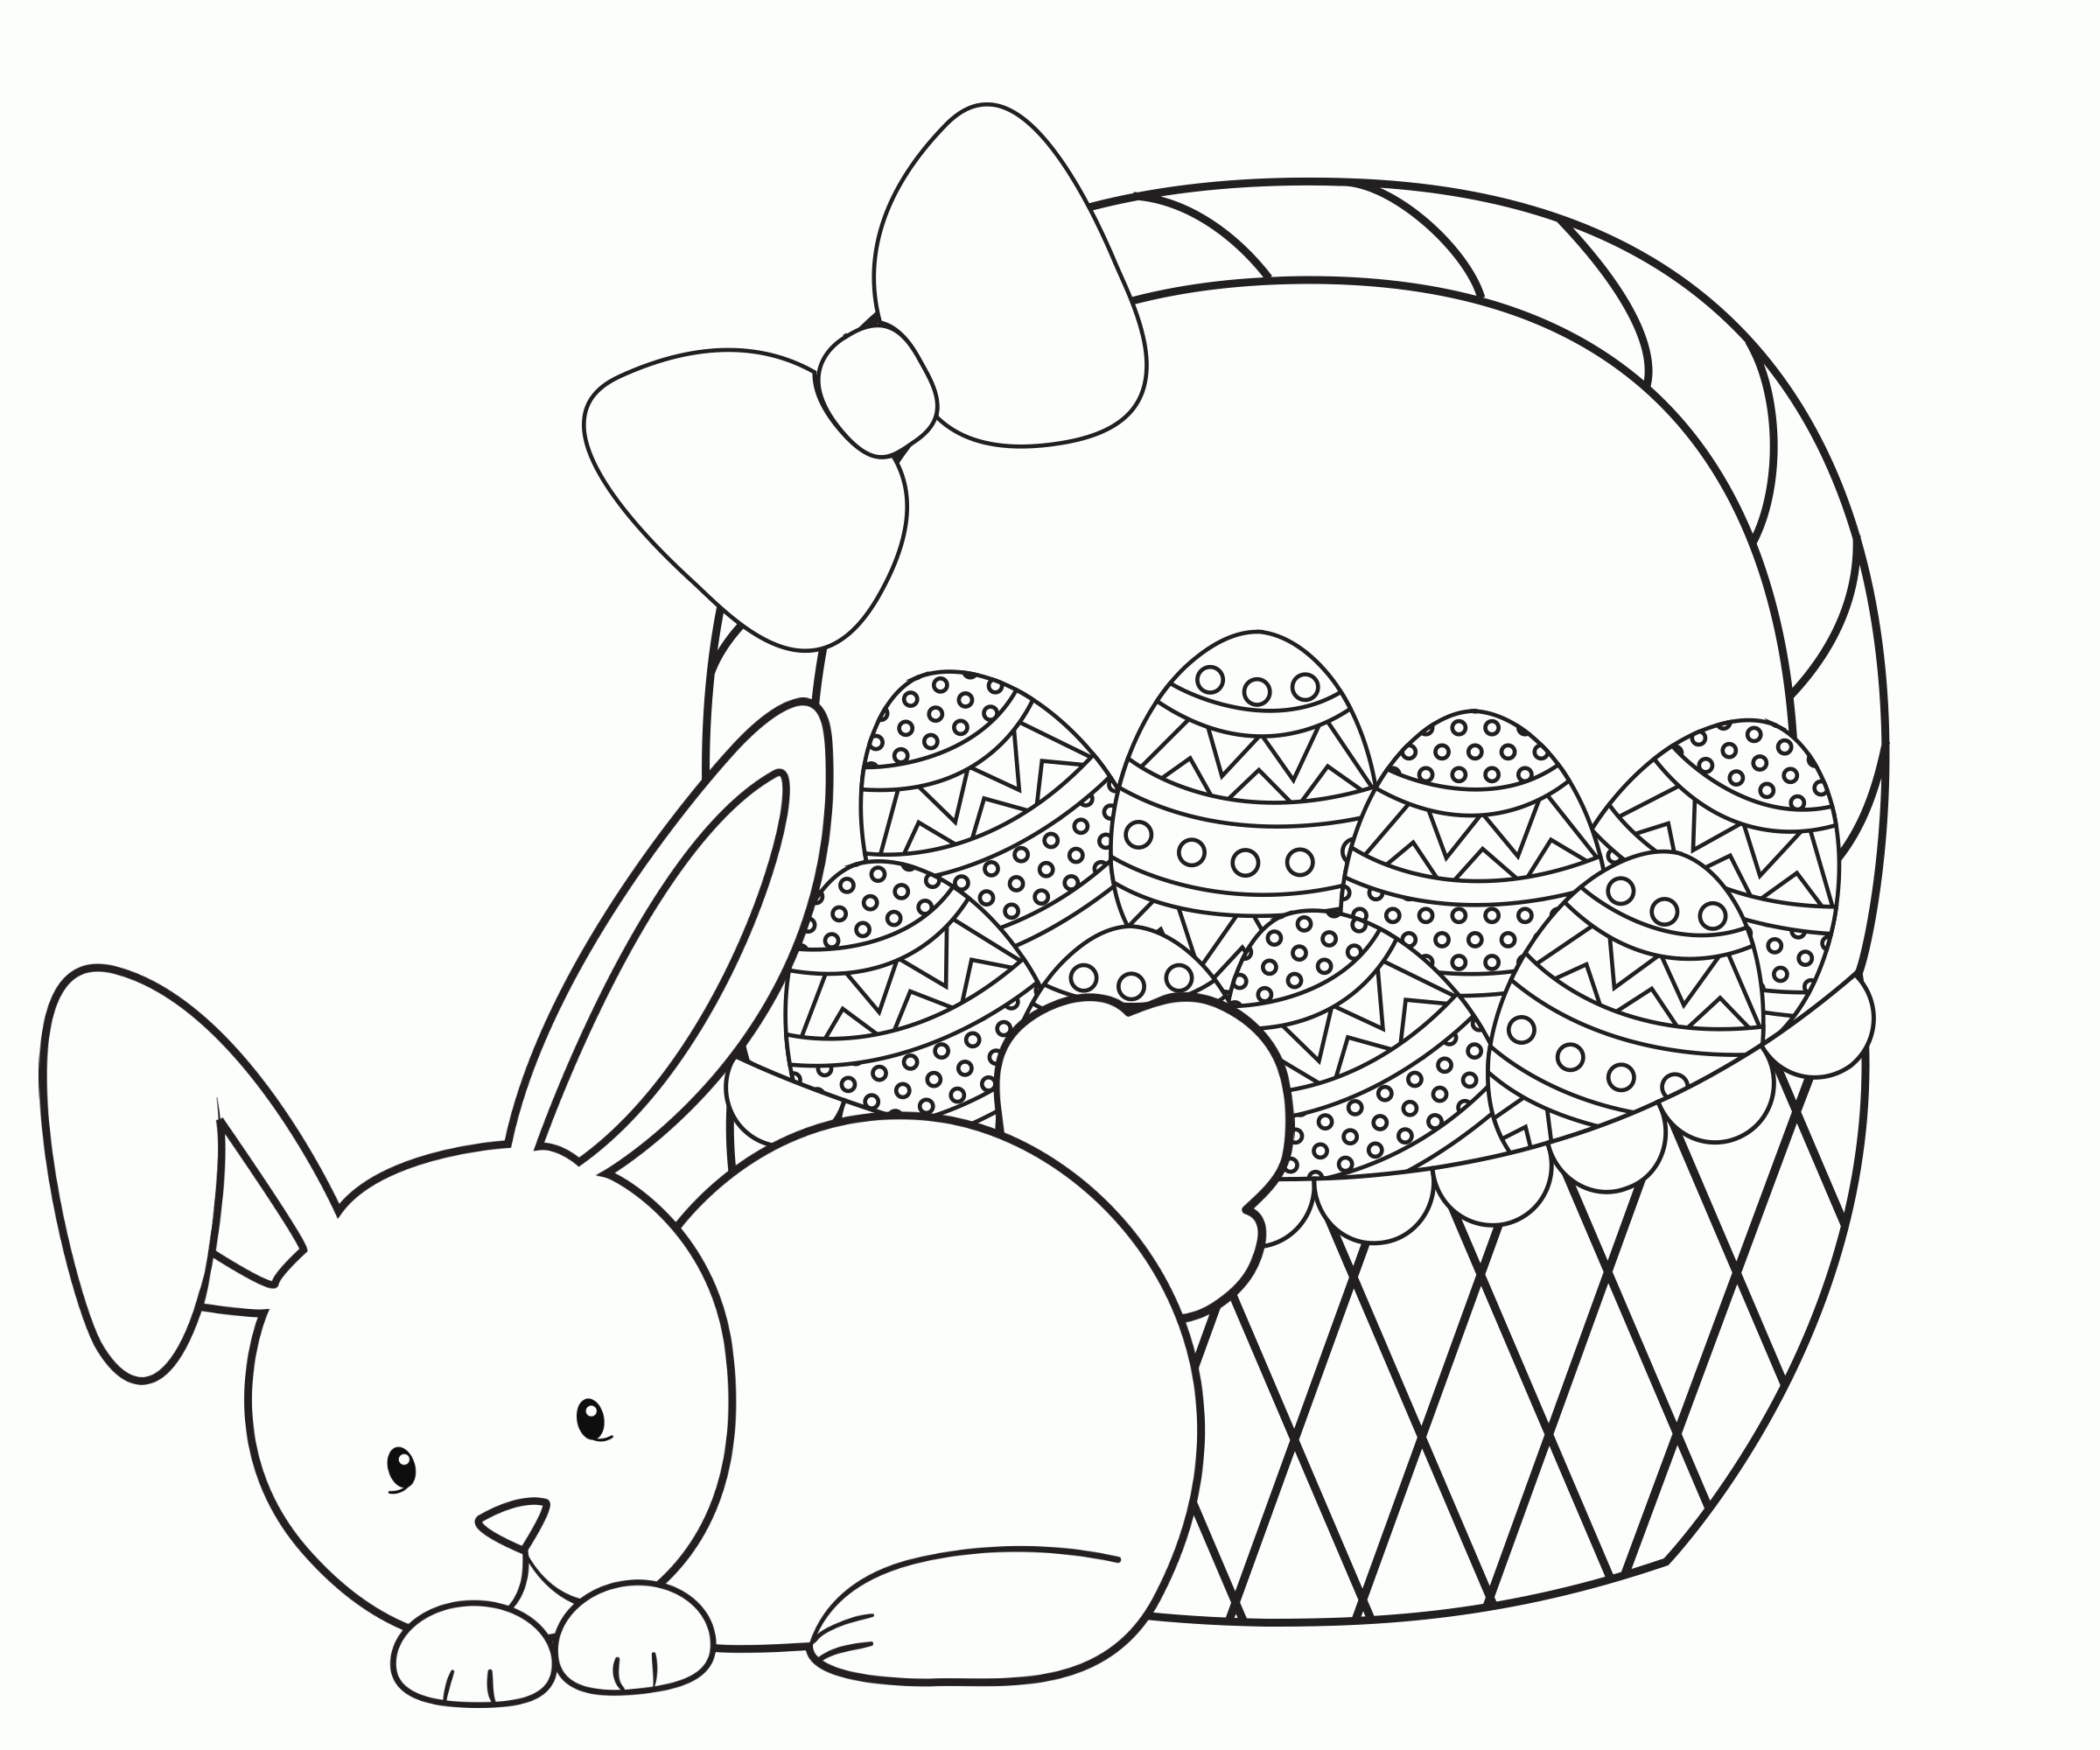 easter-egg-coloring-page-easter-egg-colouring-in-page-easter-egg-svg